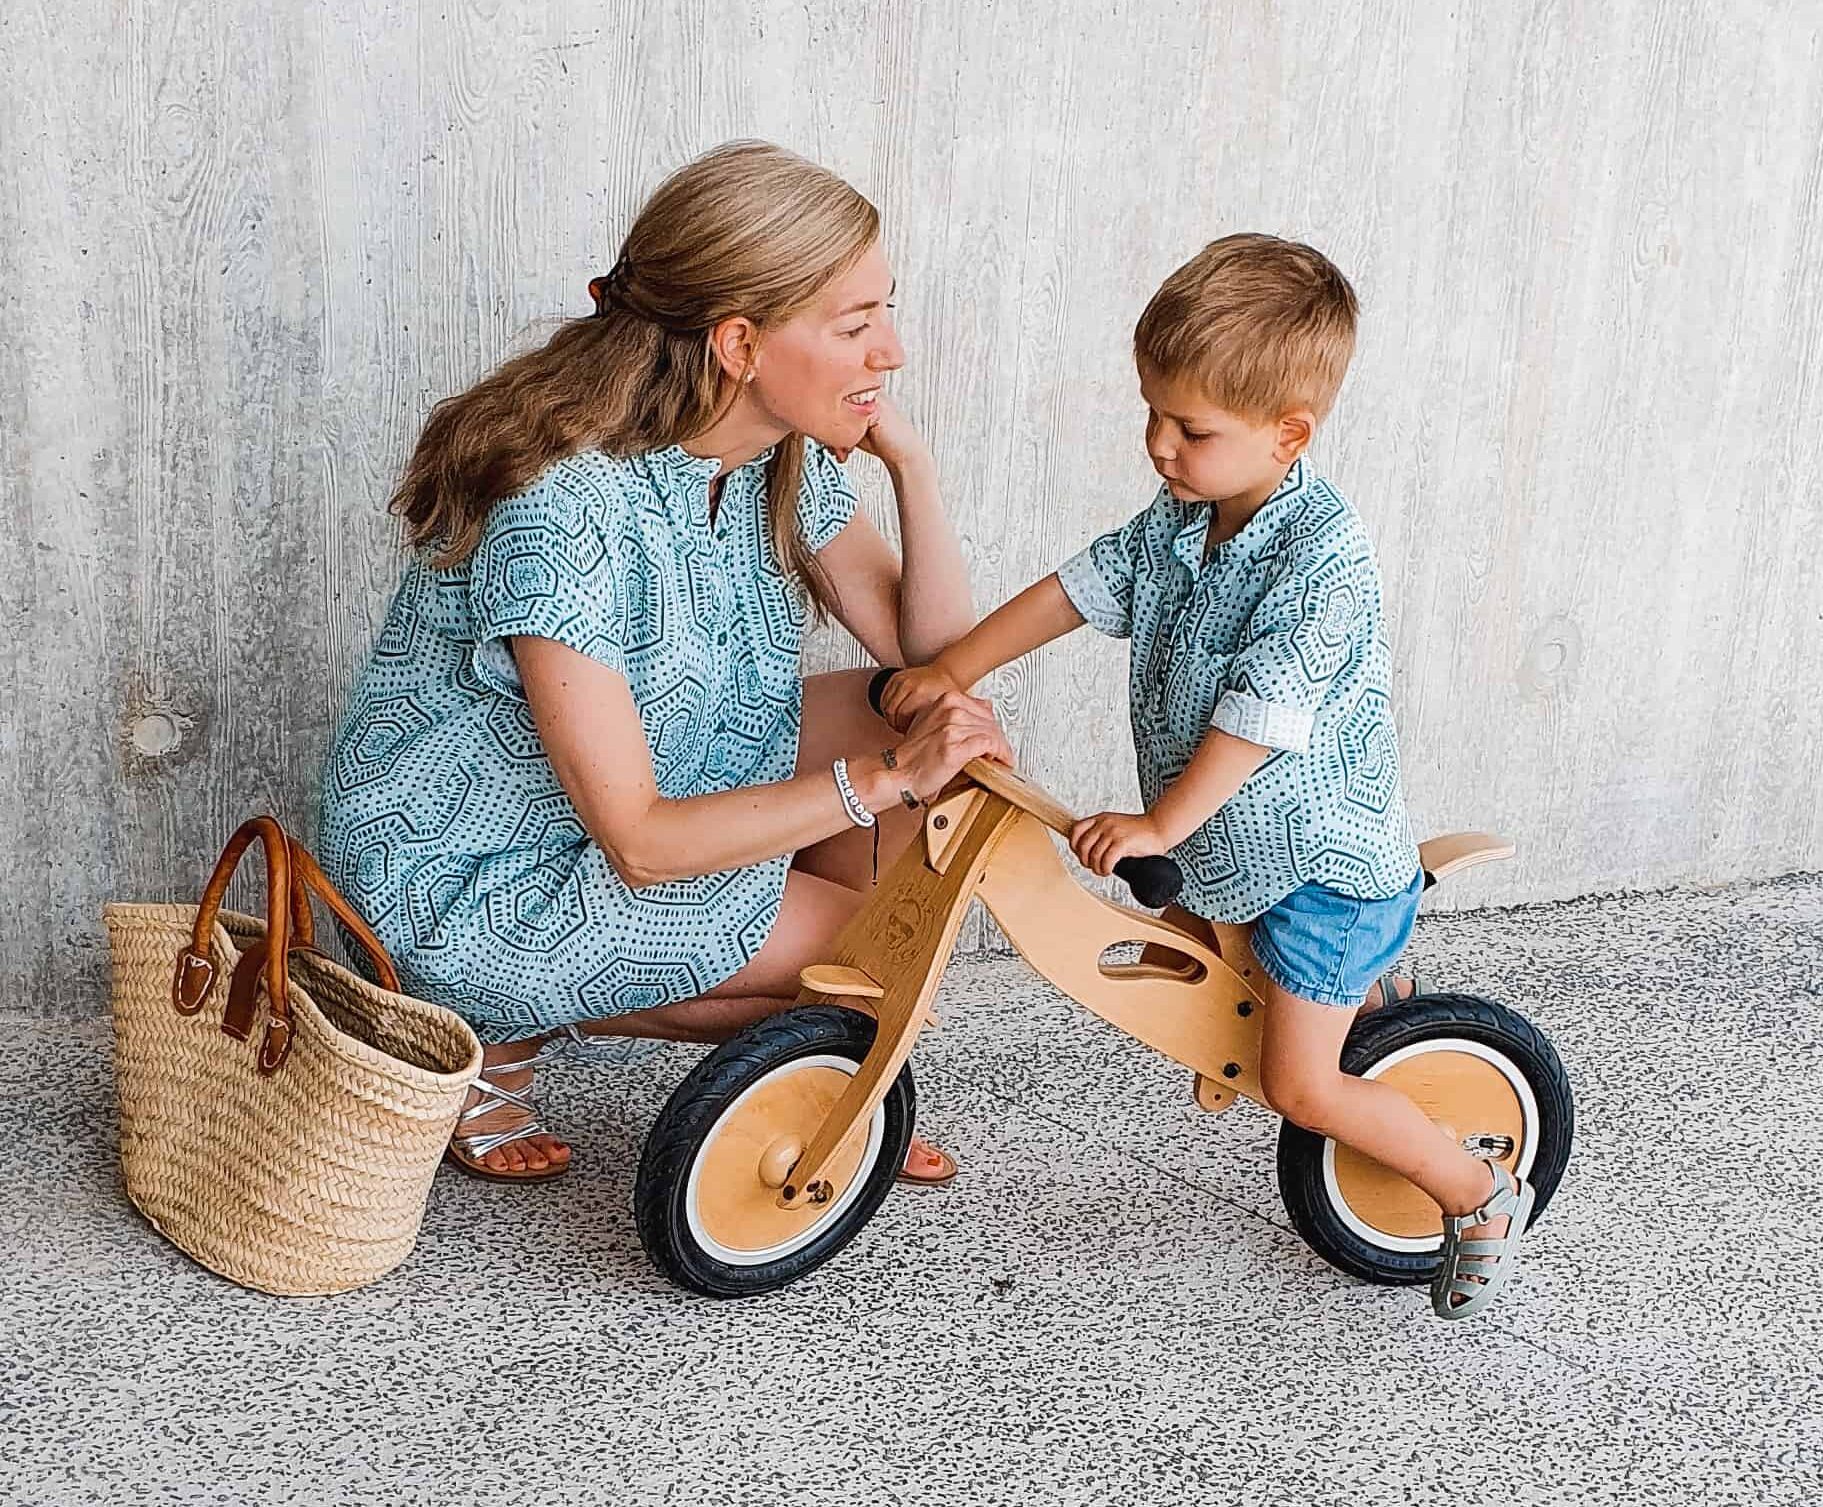 Belgian Seamstress Clio Deprest with her son in a gender-neutral matching outfit made from Spoonflower fabric.